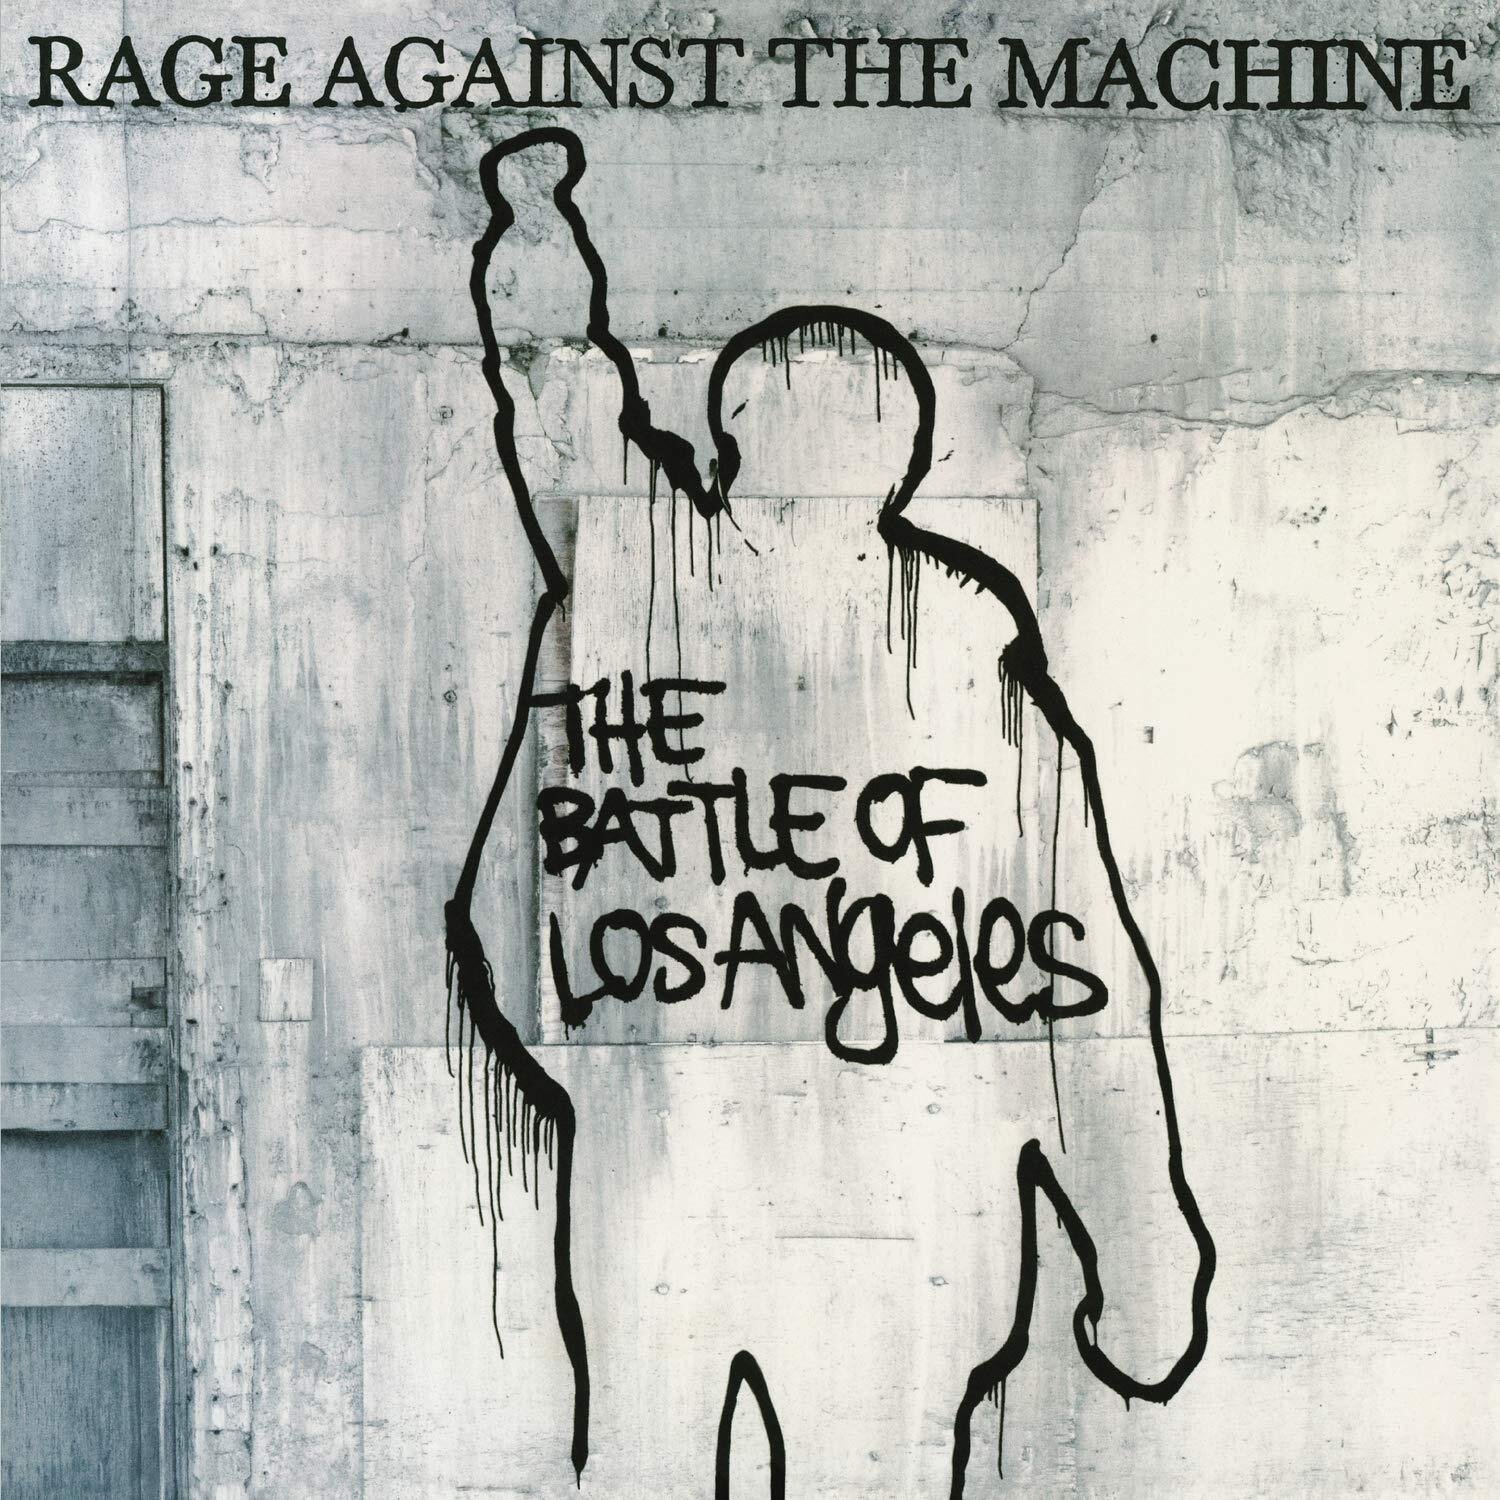 Rage Against the Machine - The Battle of Los Angeles (Do You Use Too Many Pedals?)